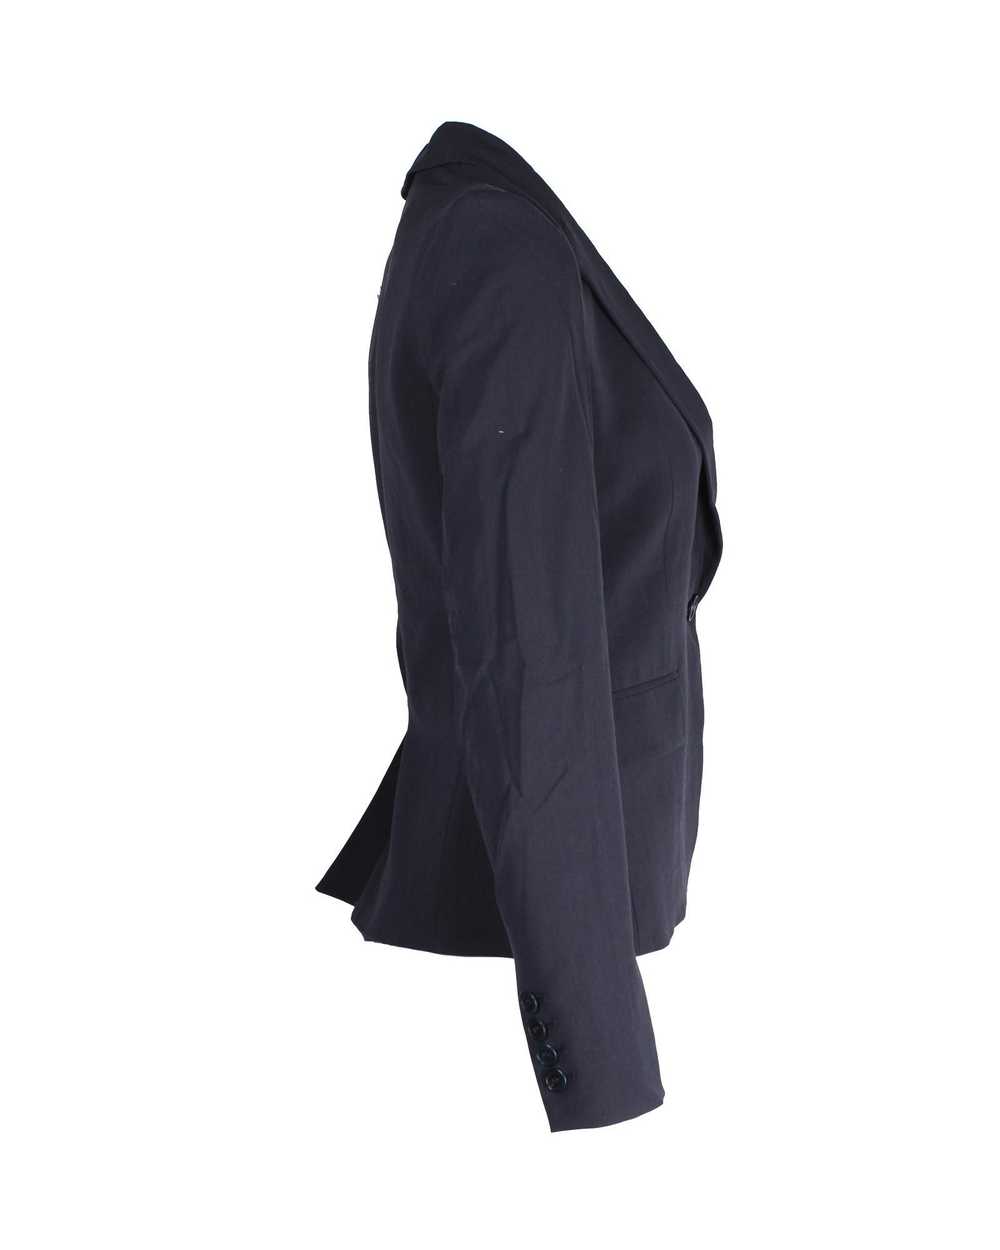 Theory Navy Blue Wool Single-Breasted Blazer - image 2